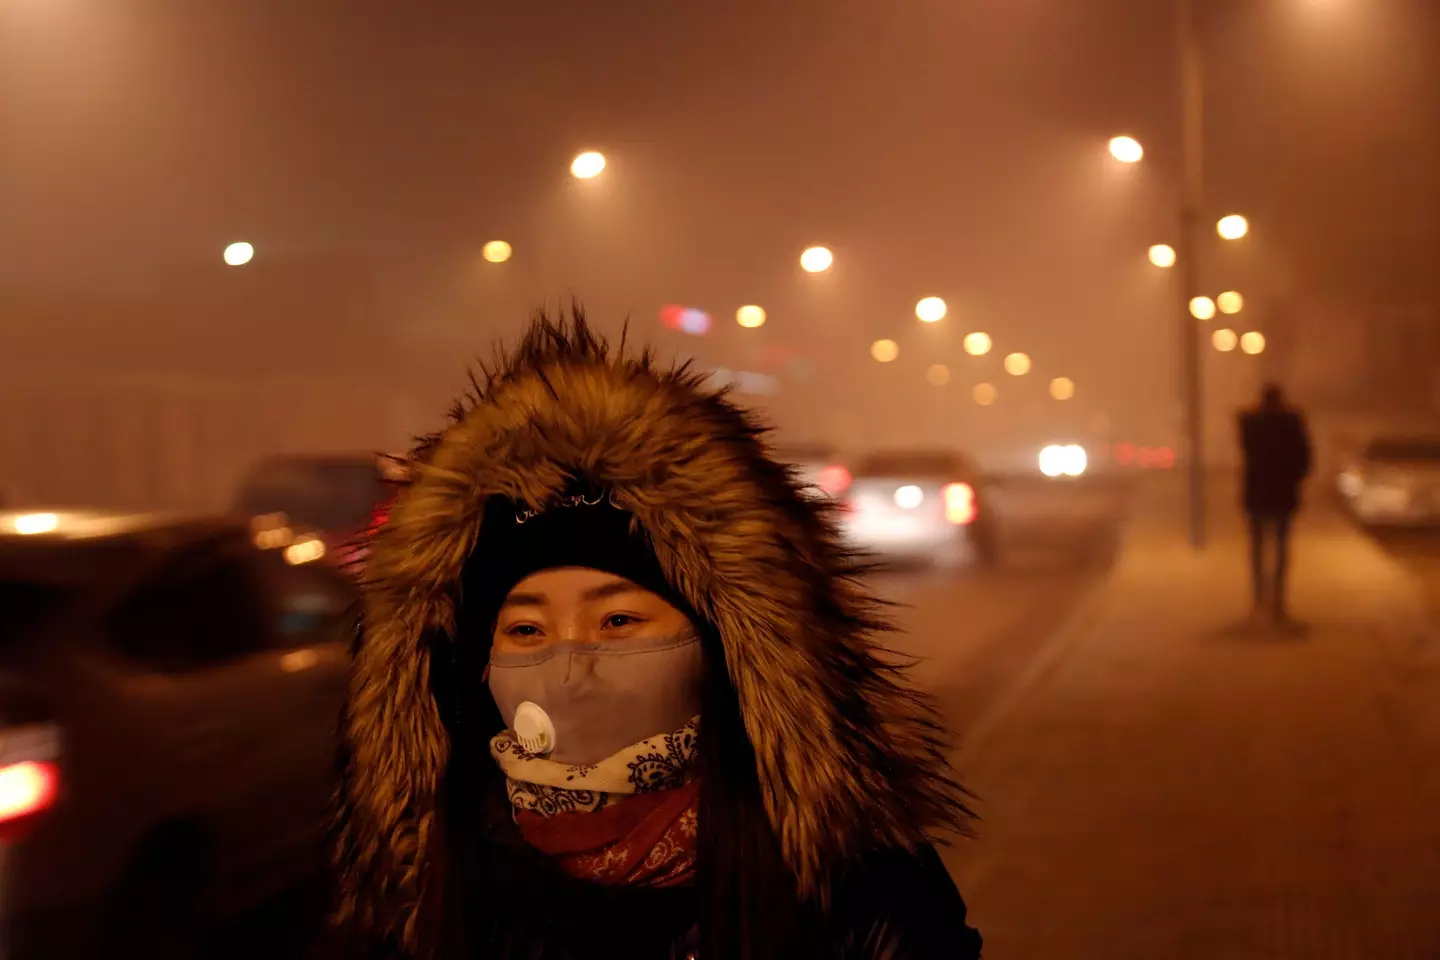 Residents wear face masks when outside to prevent the inhalation of polluted air.